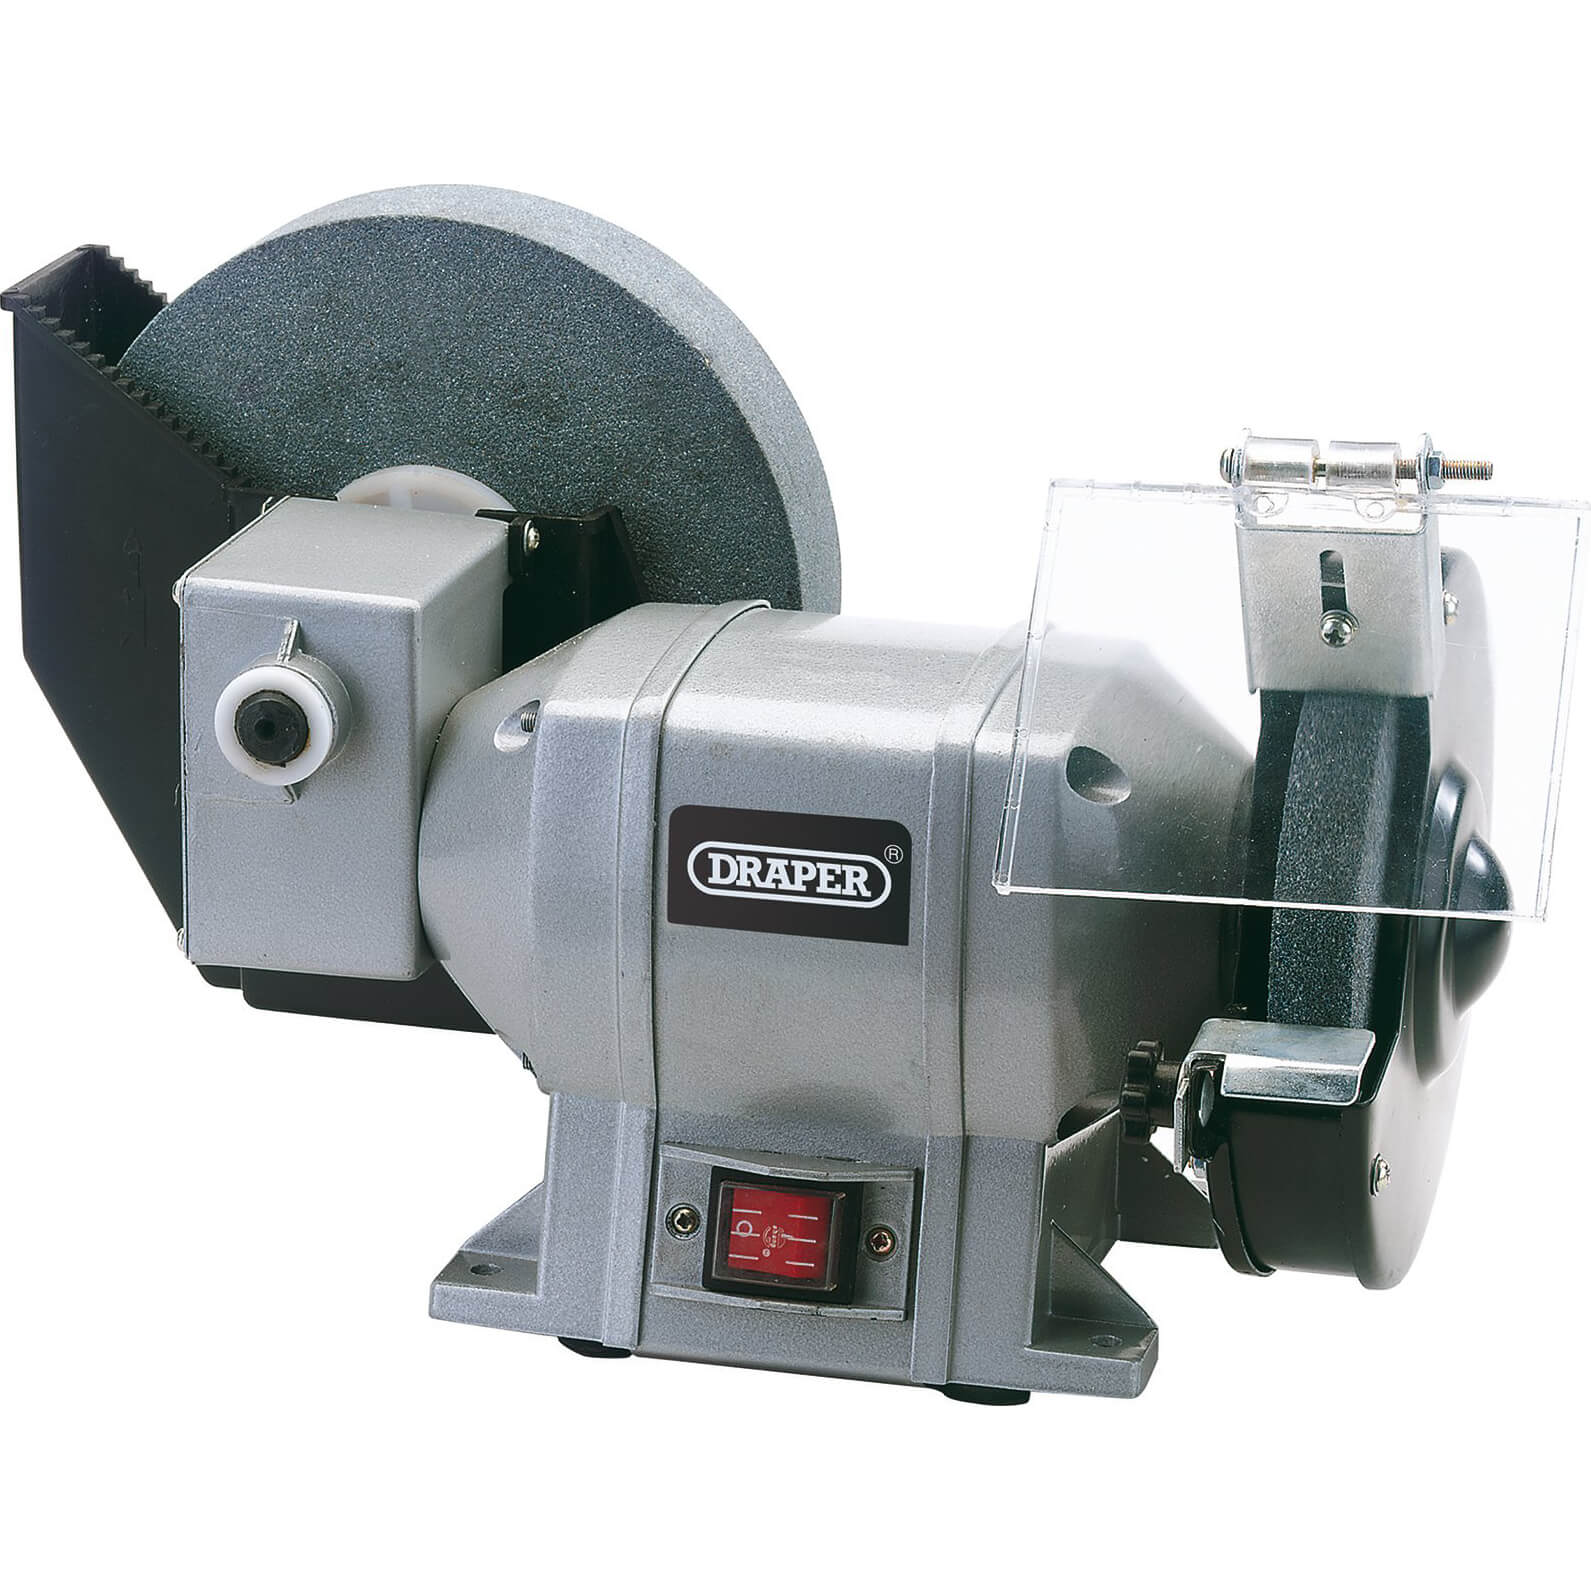 Photo of Draper Gwd200a Wet And Dry Bench Grinder 240v